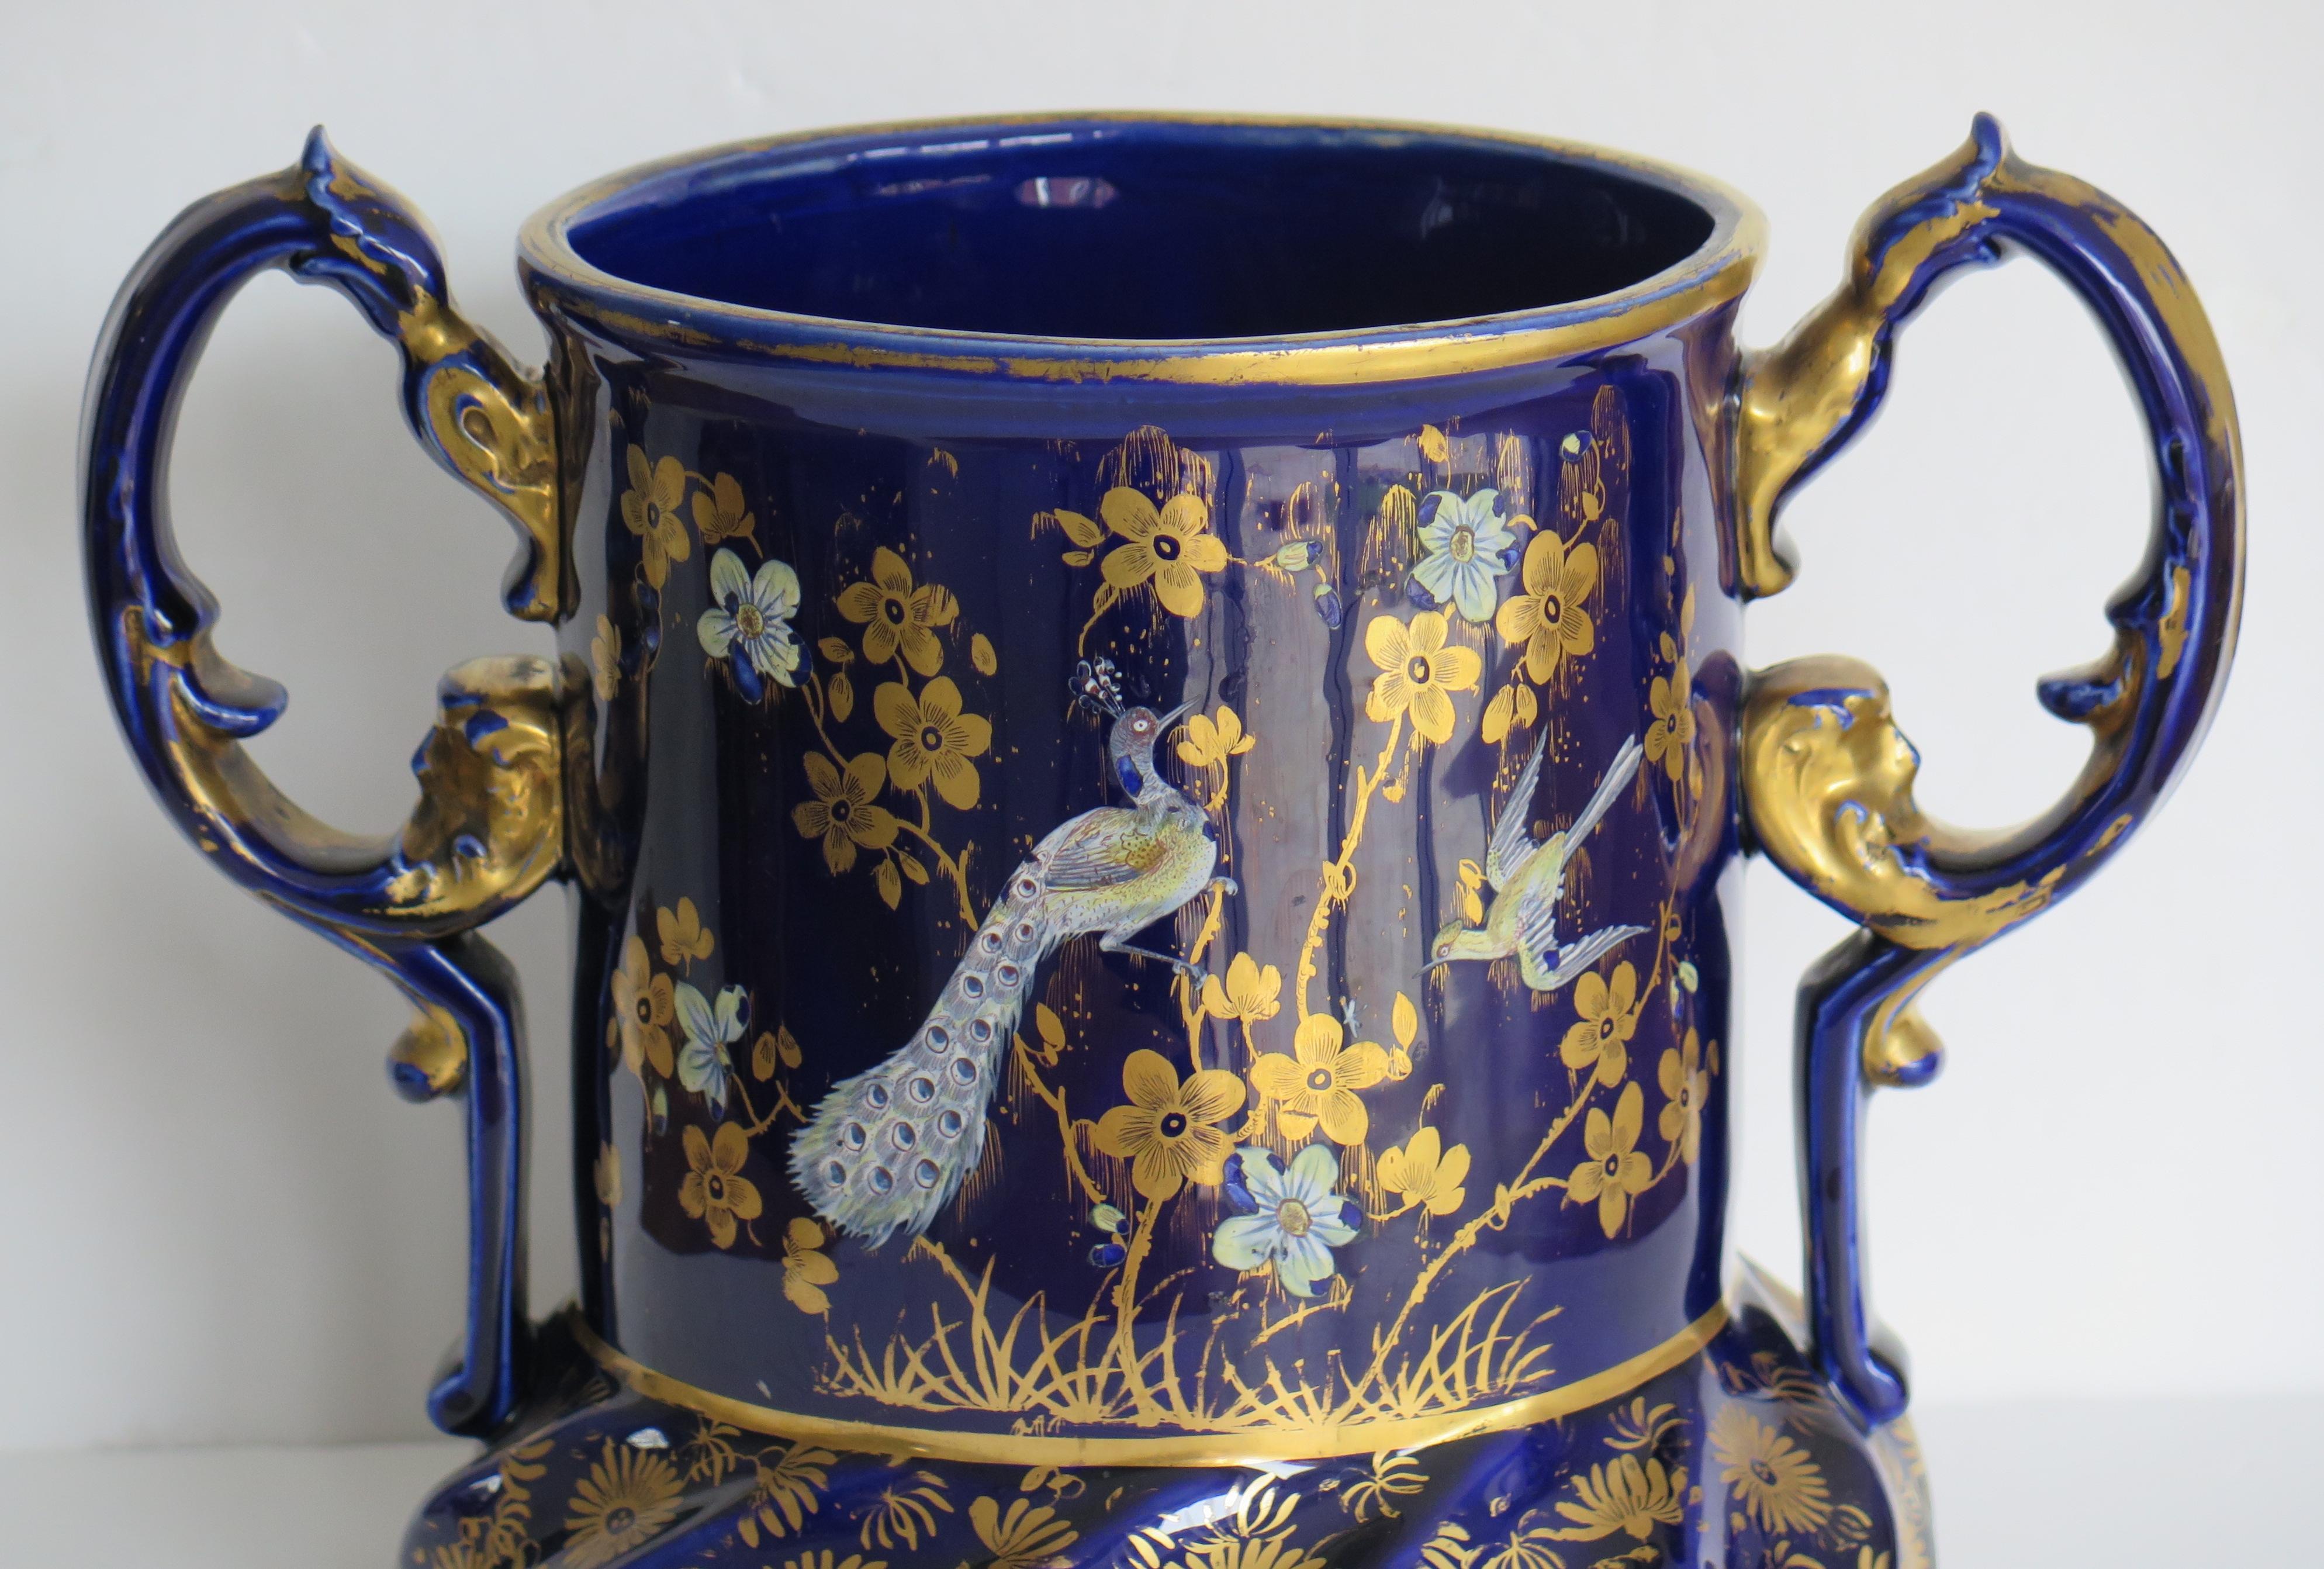 This is a superb very rare, fine quality ironstone Two Handled Pot, all beautifully hand painted, made by Mason's Patent Ironstone China Company, of Lane Delph, Staffordshire, England, circa 1820. 

This piece is substantial and heavily potted,